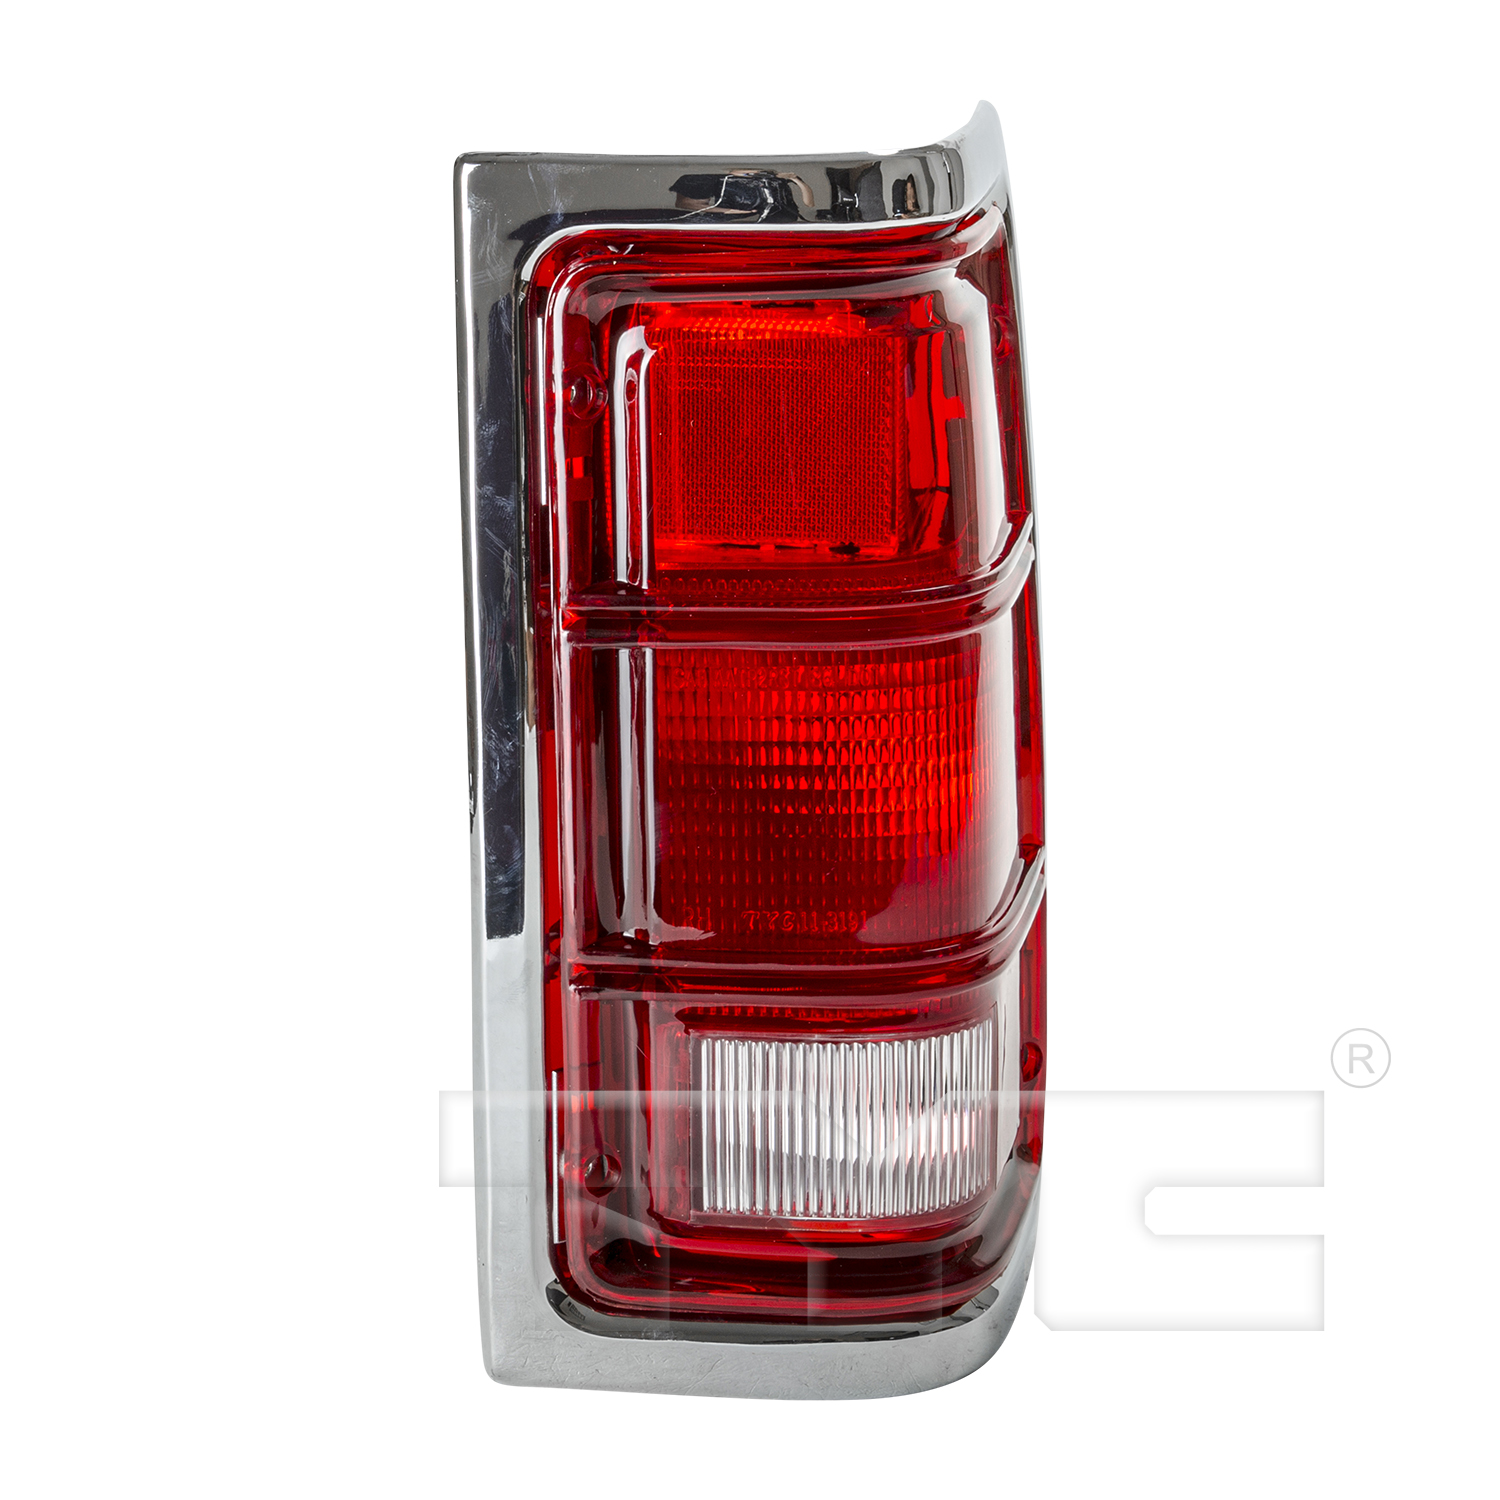 Aftermarket TAILLIGHTS for DODGE - D350, D350,87-91,RT Taillamp lens